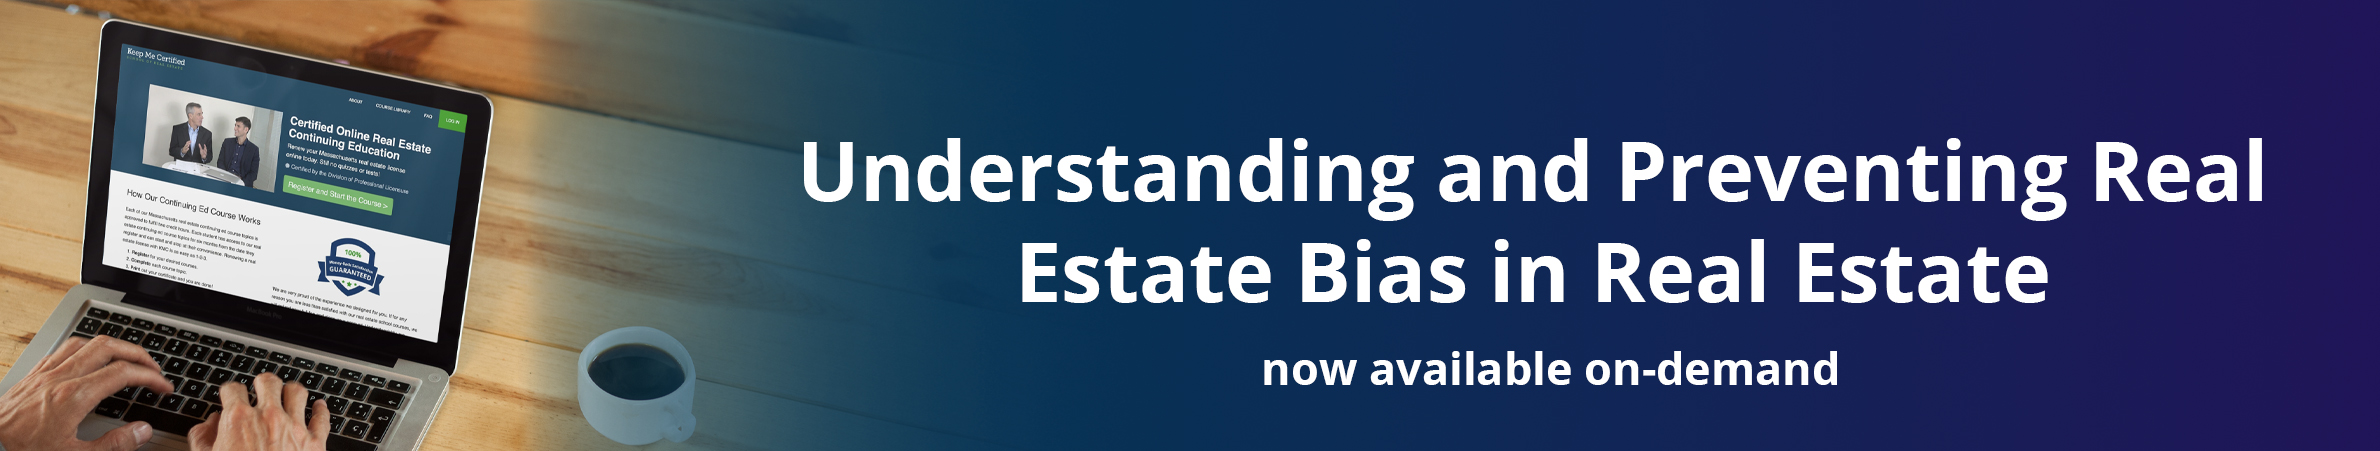 Understanding and Preventing Racial Bias in Real Estate Continuing Ed Course